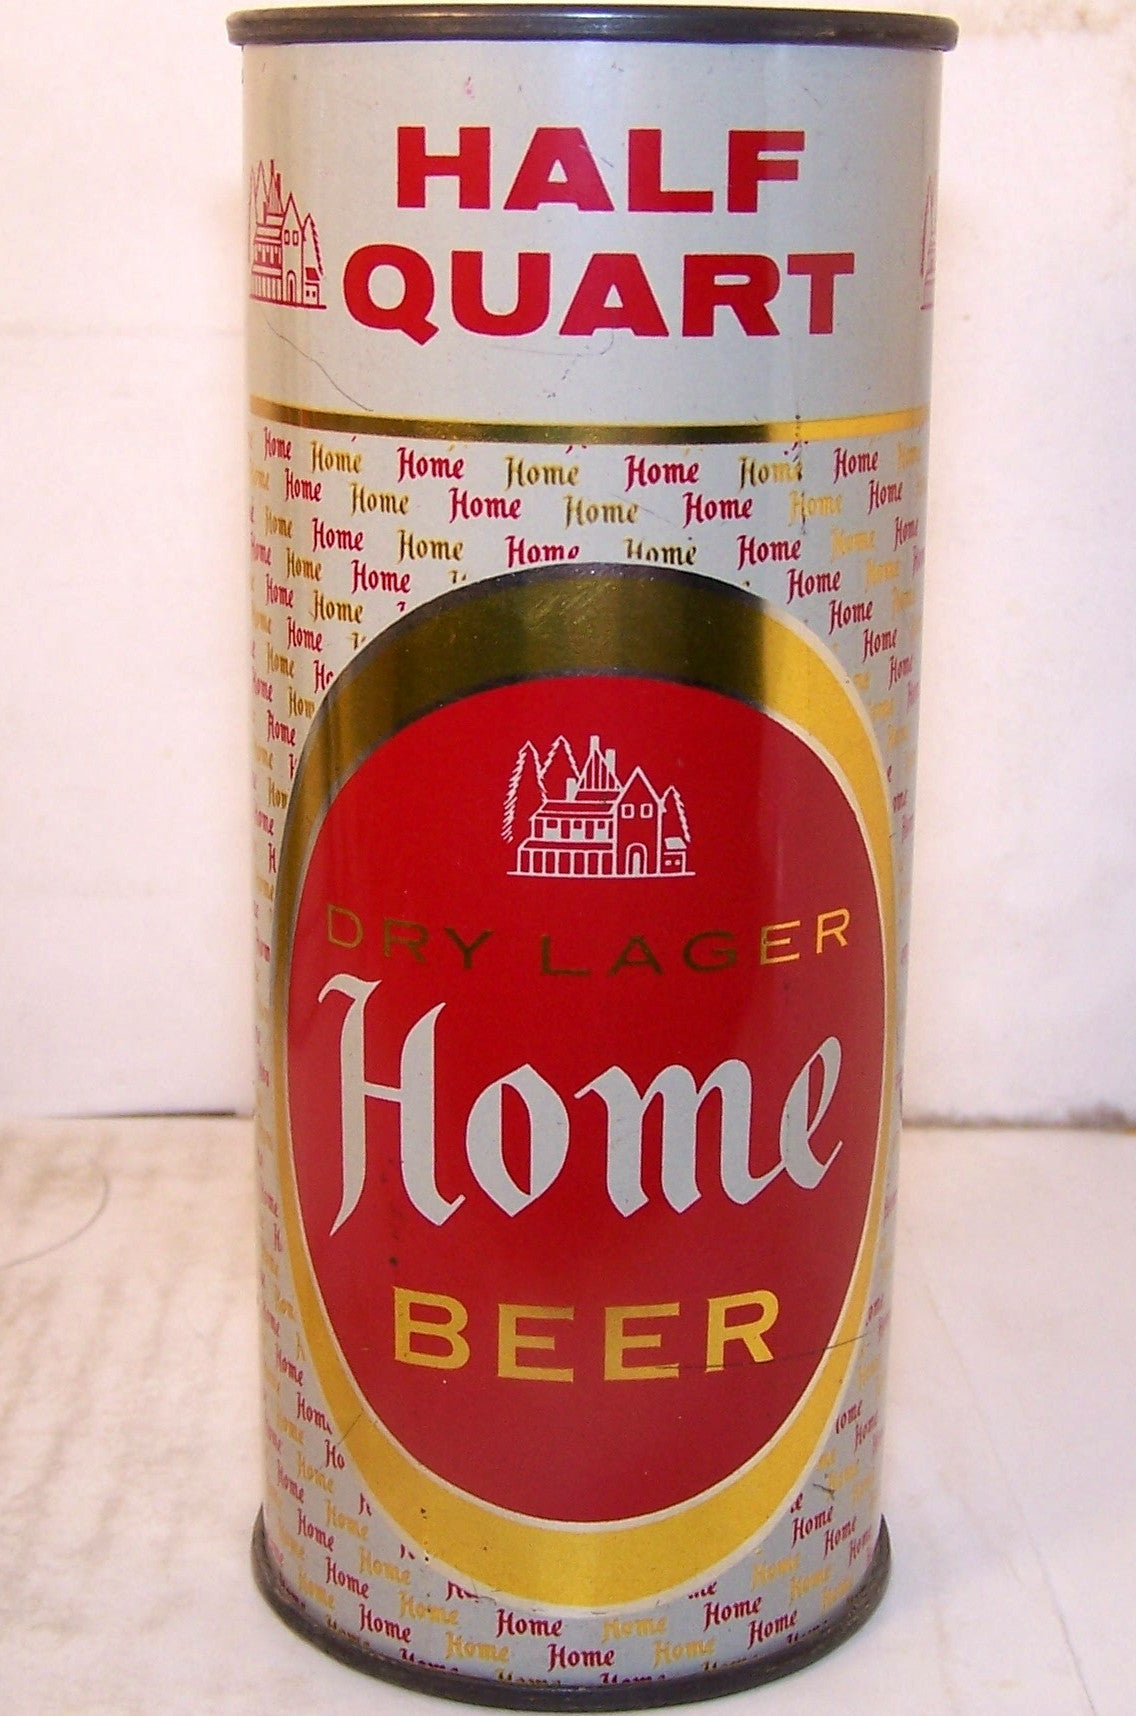 Home Dry Lager Beer, USBC 231-3, Grade 1/1-sold2/21/16